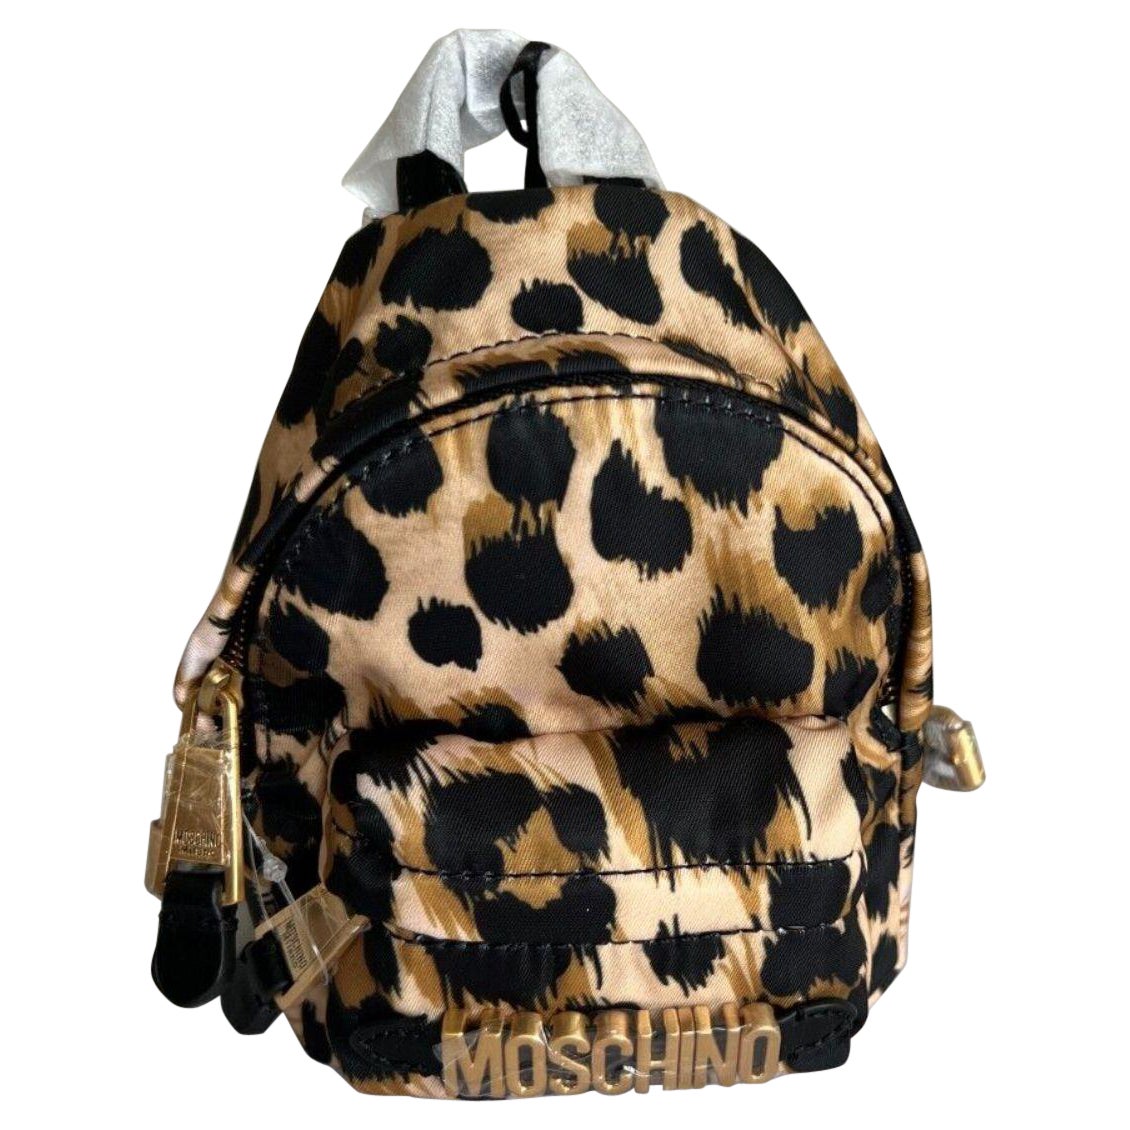 AW21 Moschino Couture Leopard Print Shoulder Bag Mini Backpack by Jeremy Scott For Sale